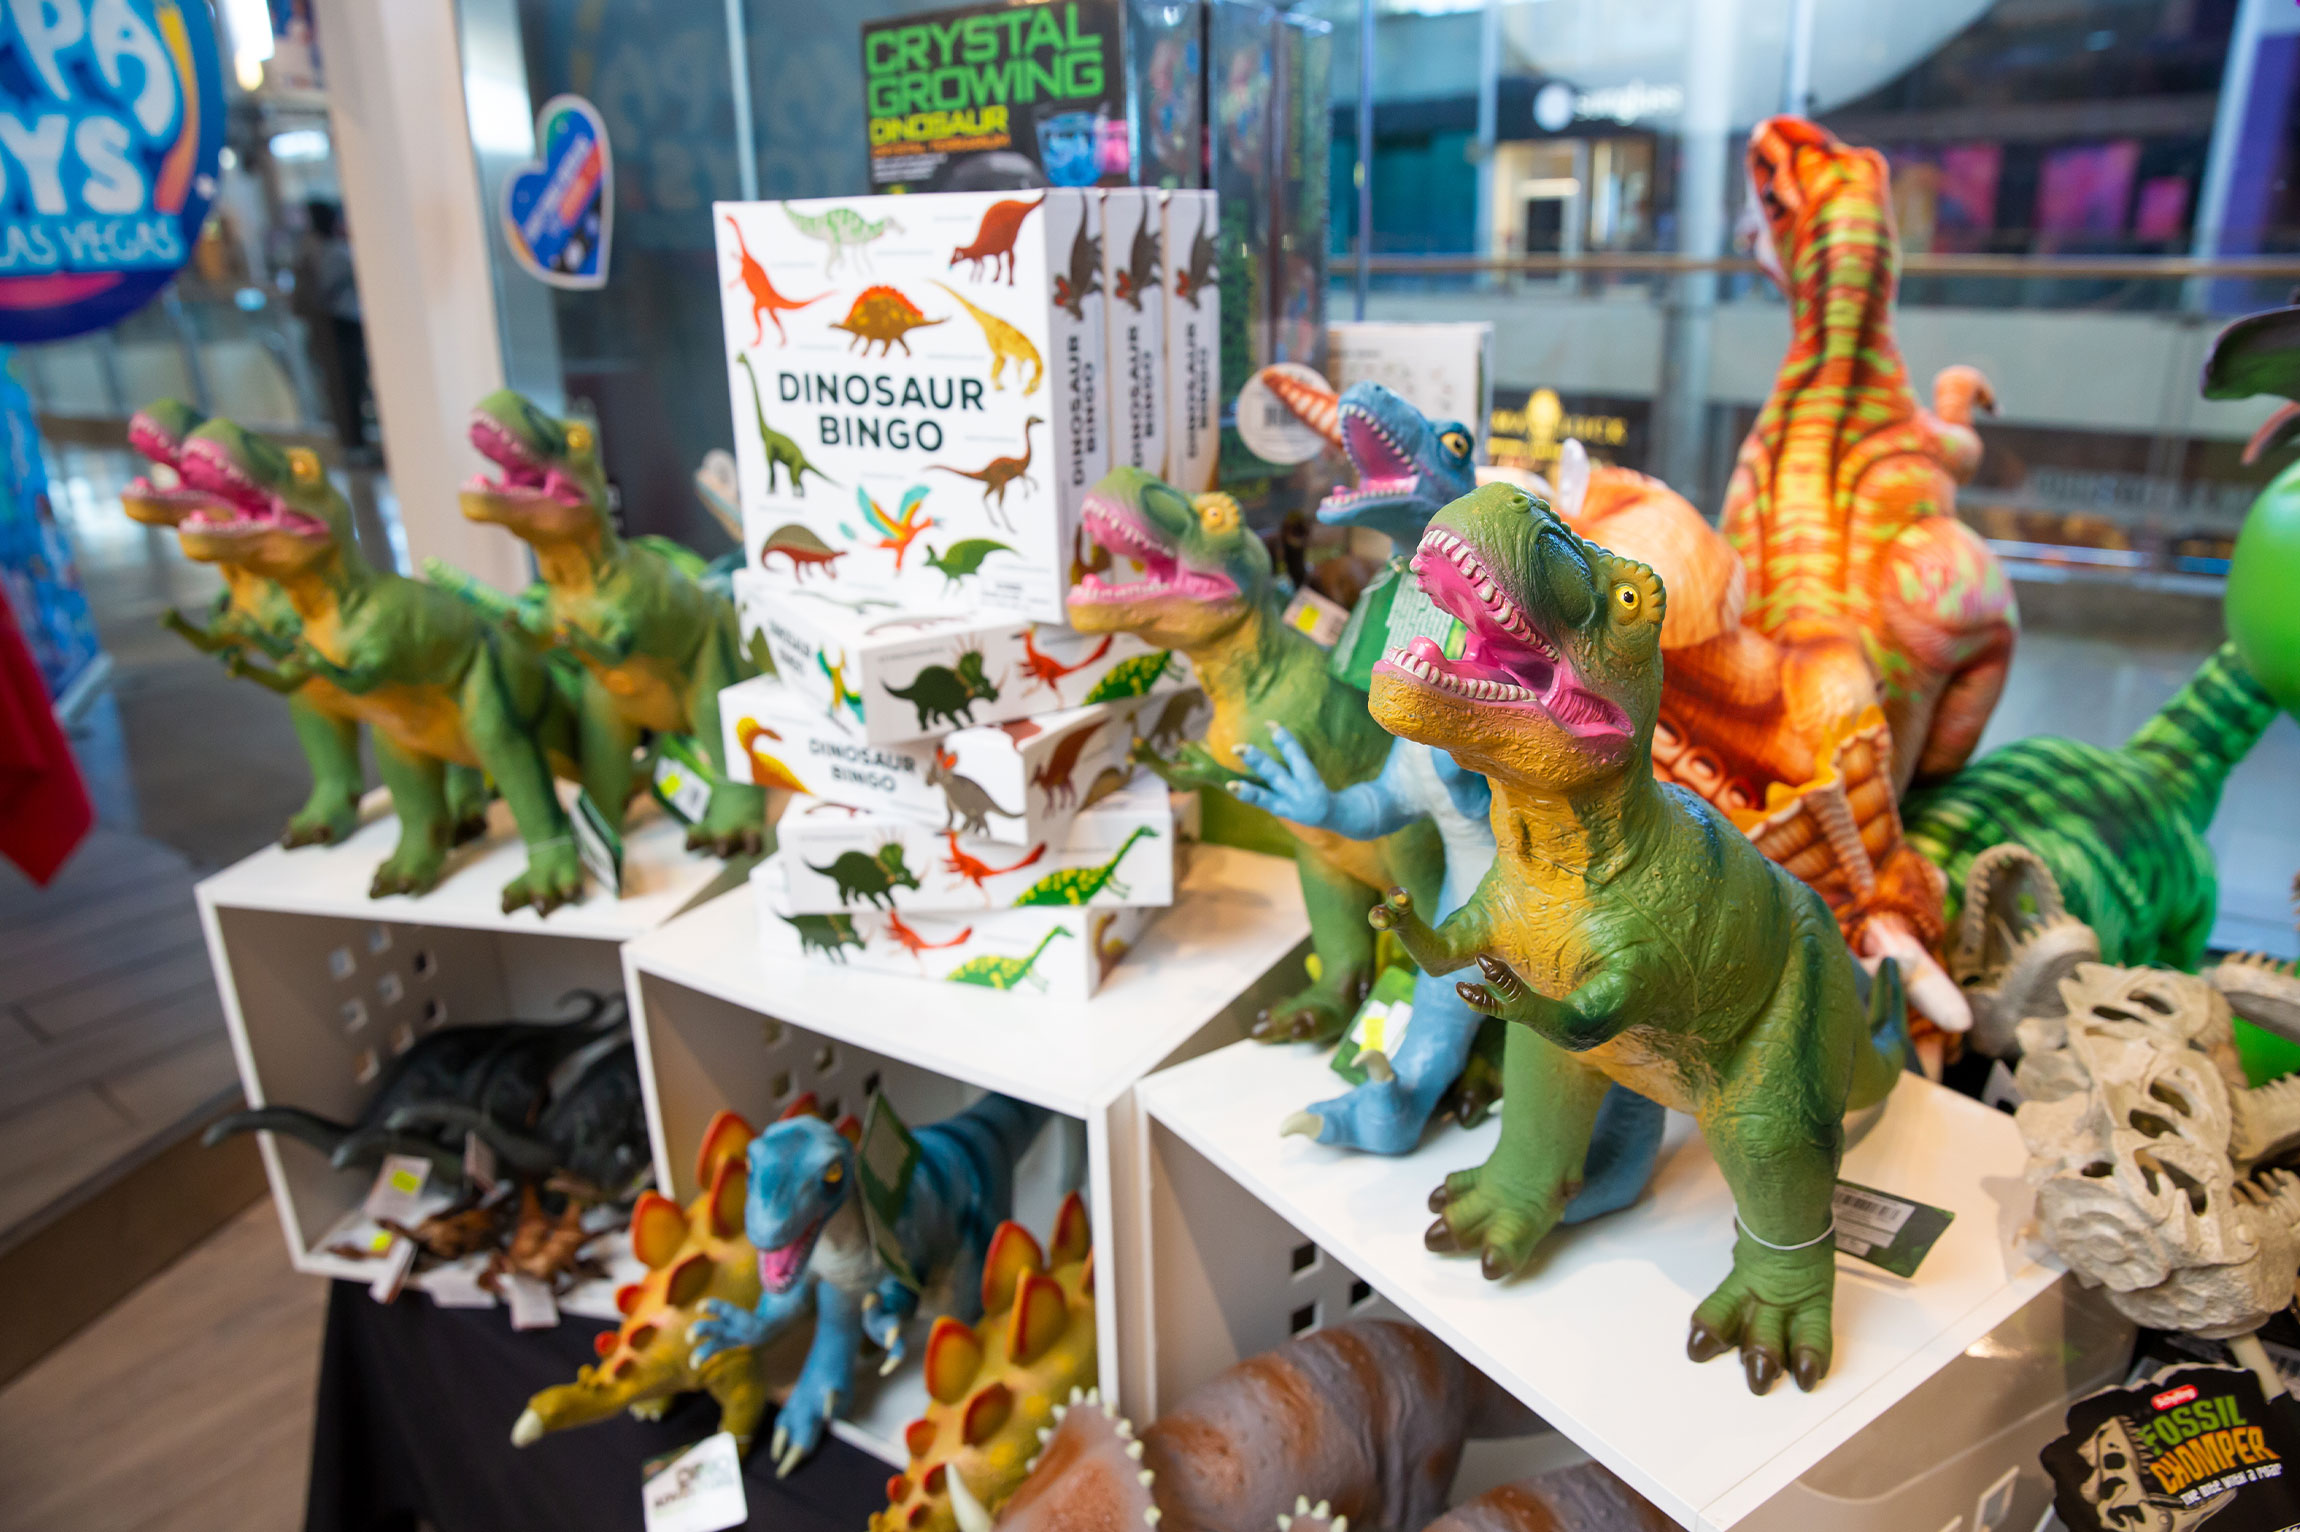 In pictures: The best toy stores from around the world